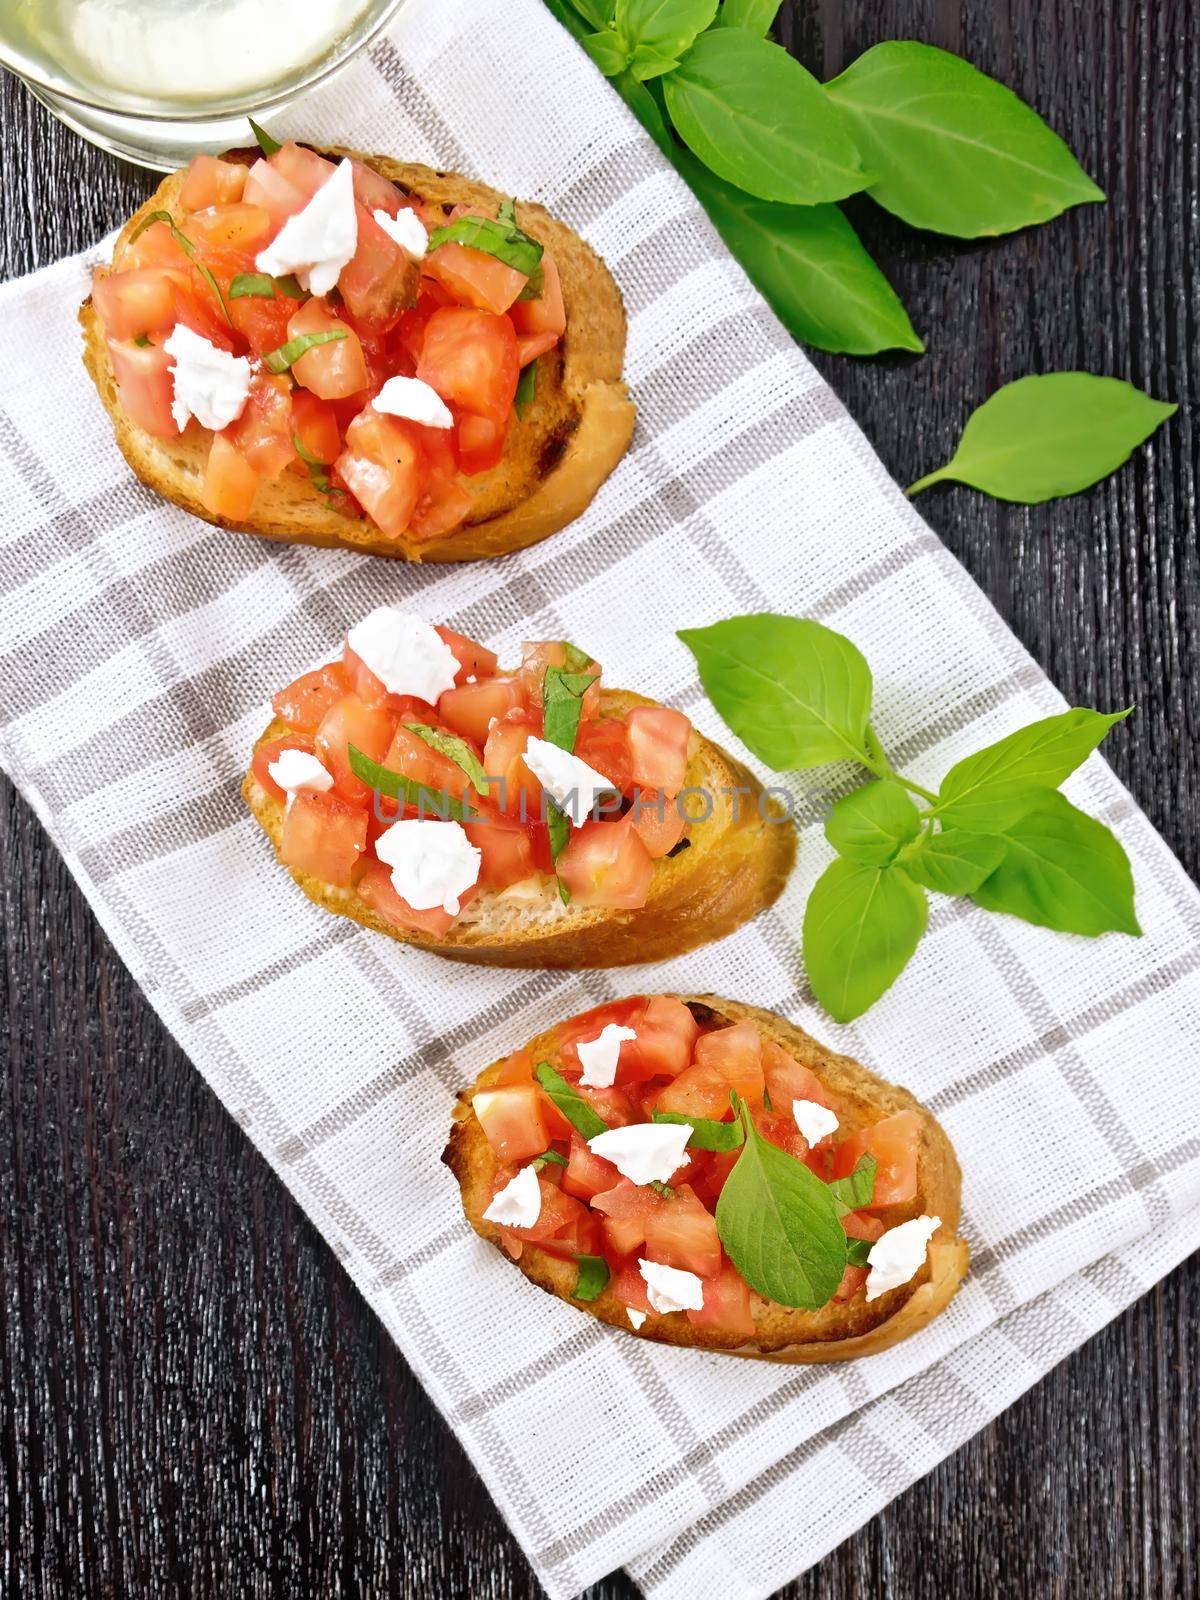 Bruschetta with tomato, basil and soft cheese on a napkin on wooden board from above